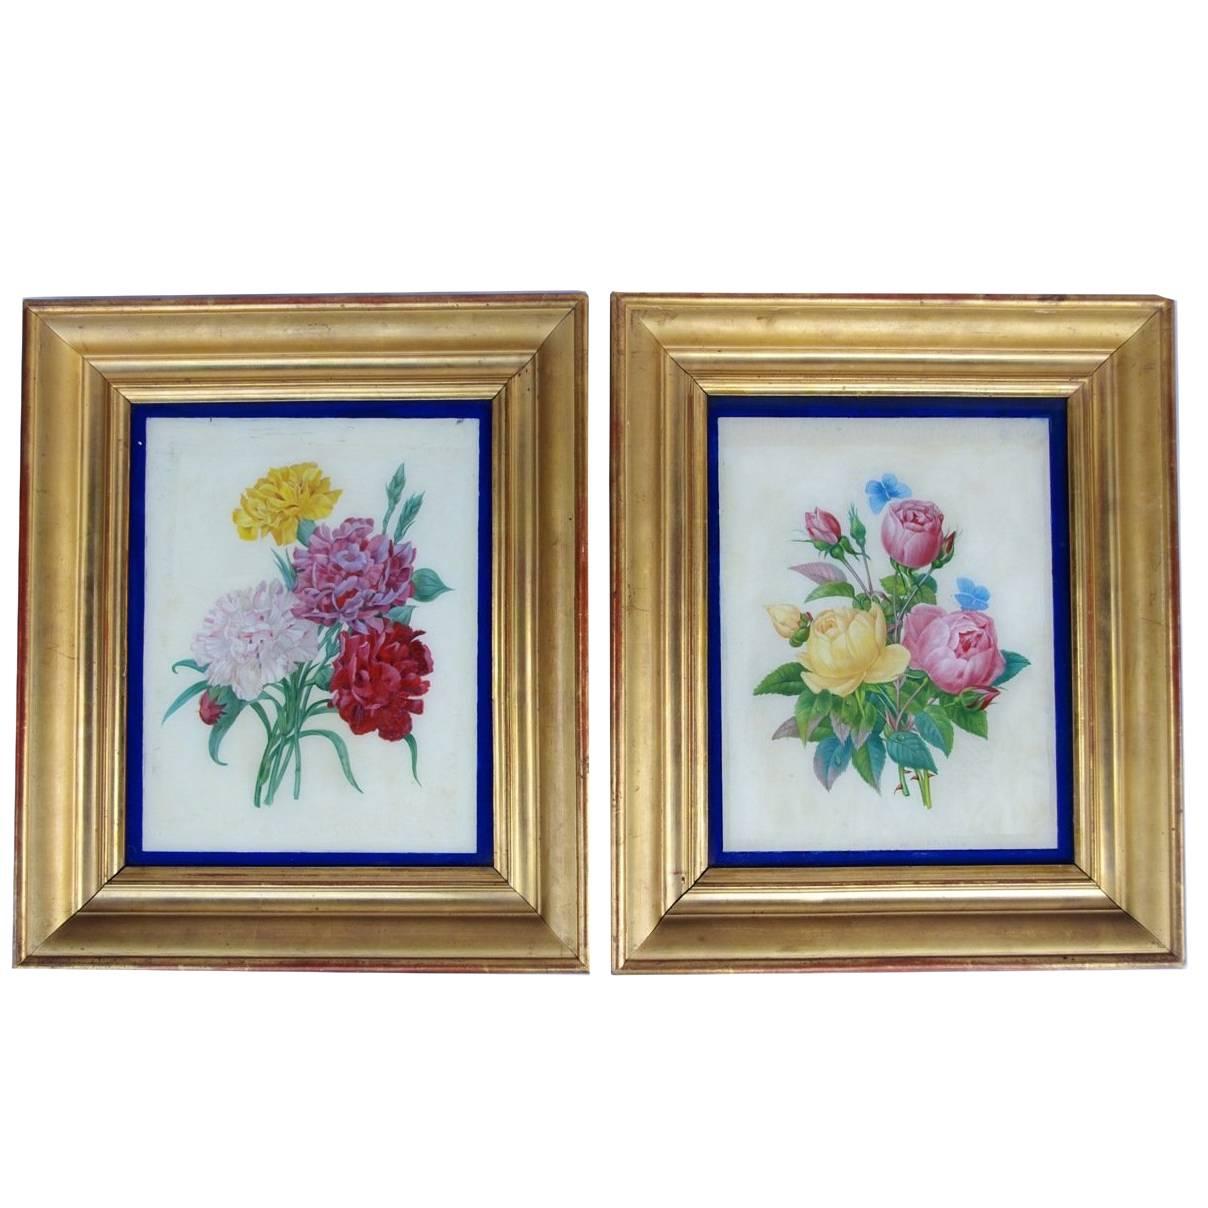 Pair of Restauration style reverse glass paintings, late 19th century